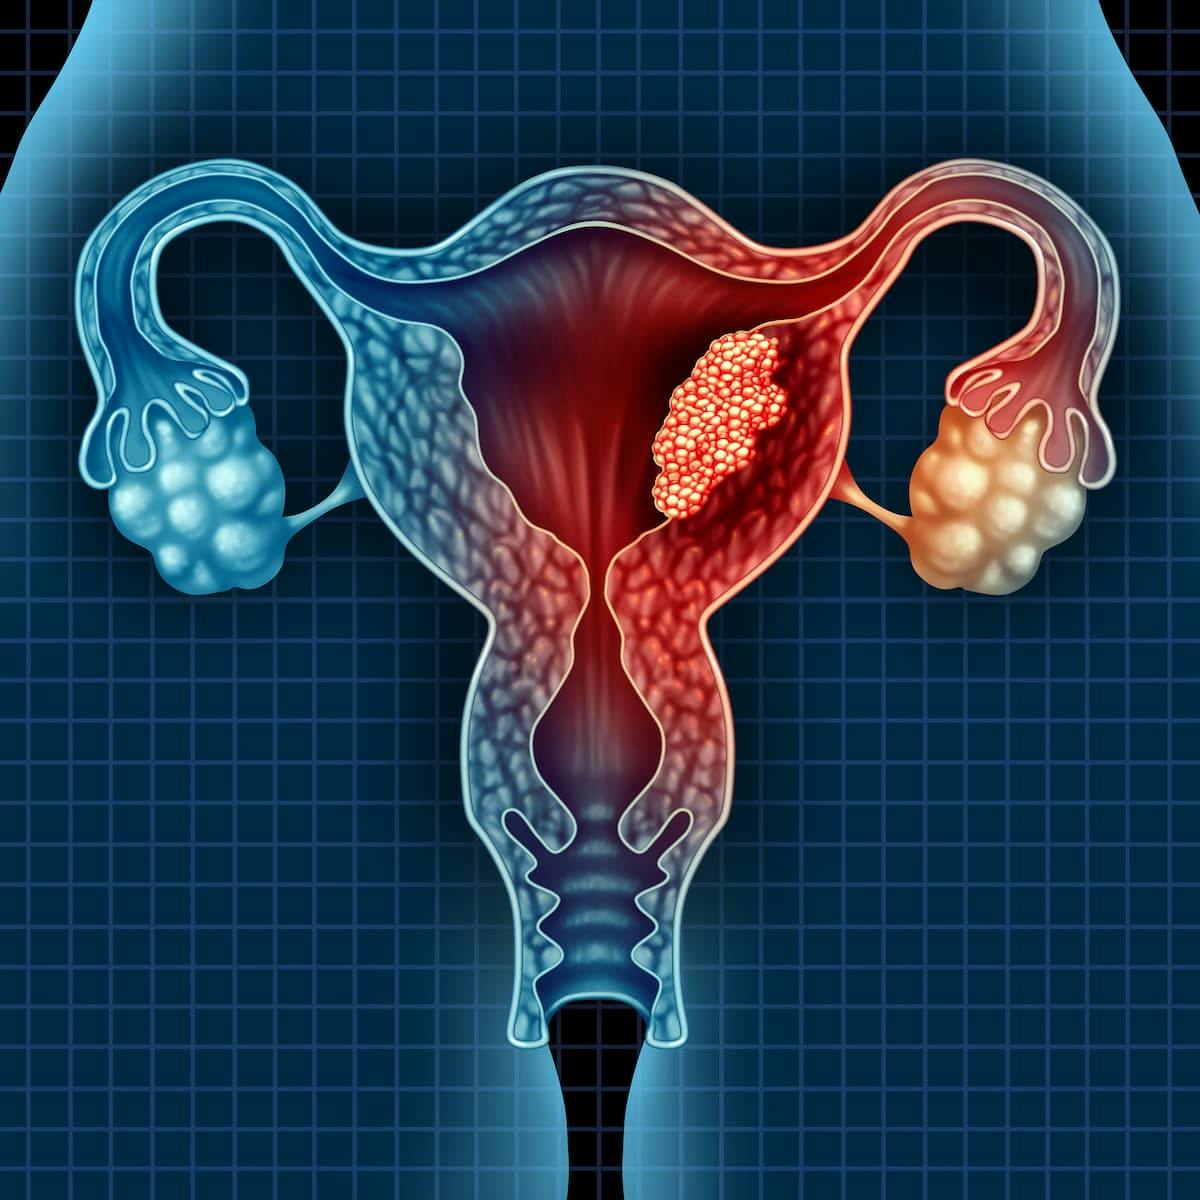 Results from a retrospective cohort study indicated that vaginal brachytherapy resulted in less radiation exposure to the female urethra in patients with endometrial cancer than external beam radiation therapy for those with colorectal cancer.